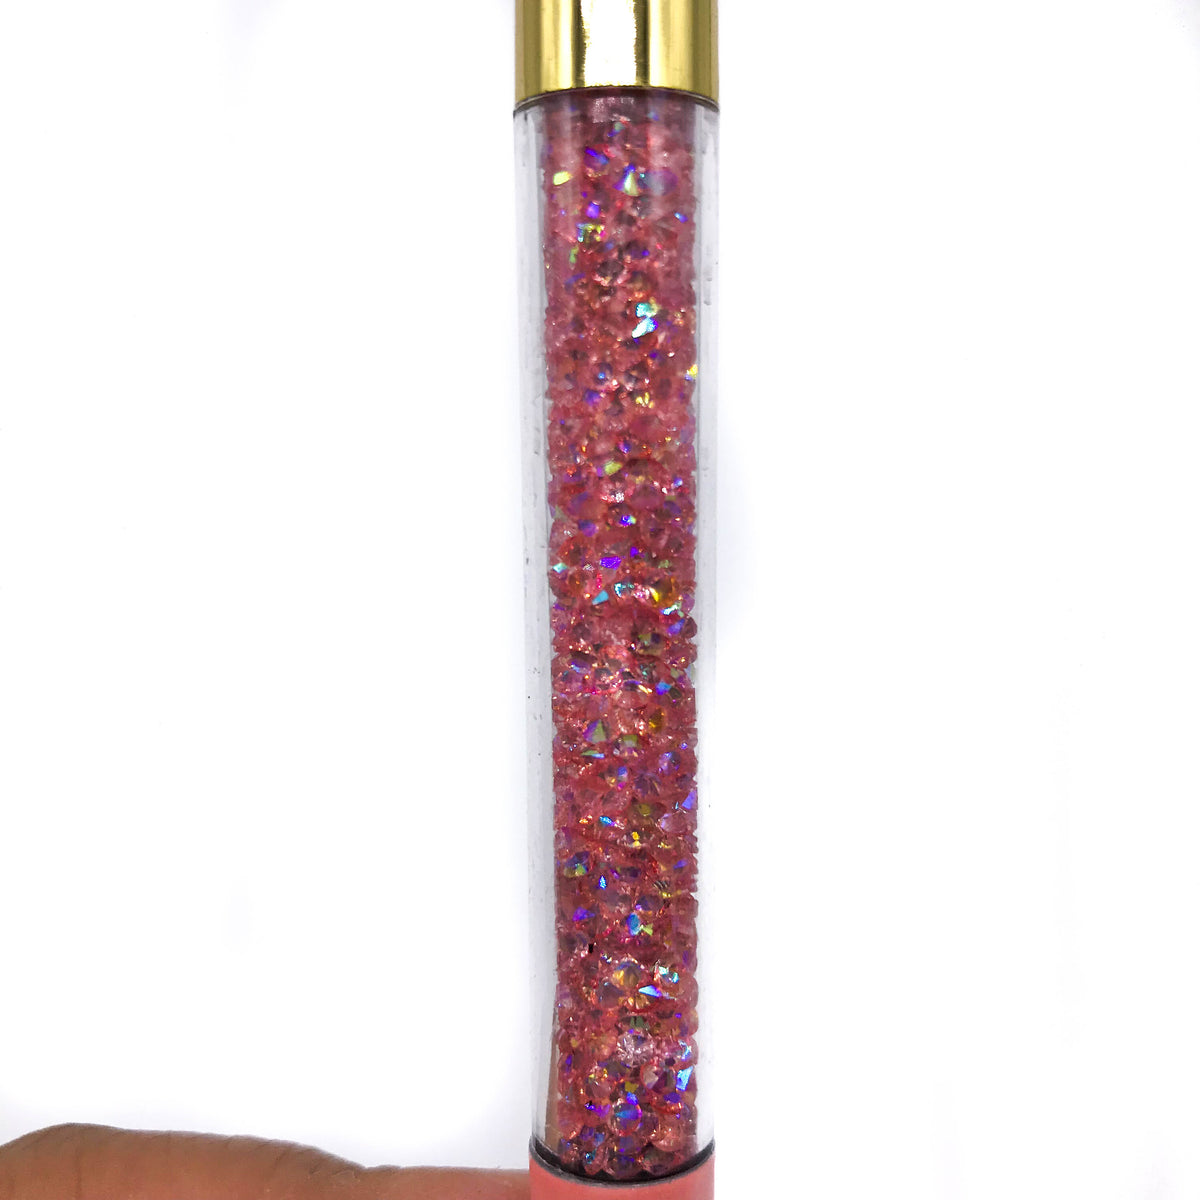 Pinktini Crystal VBPen | limited